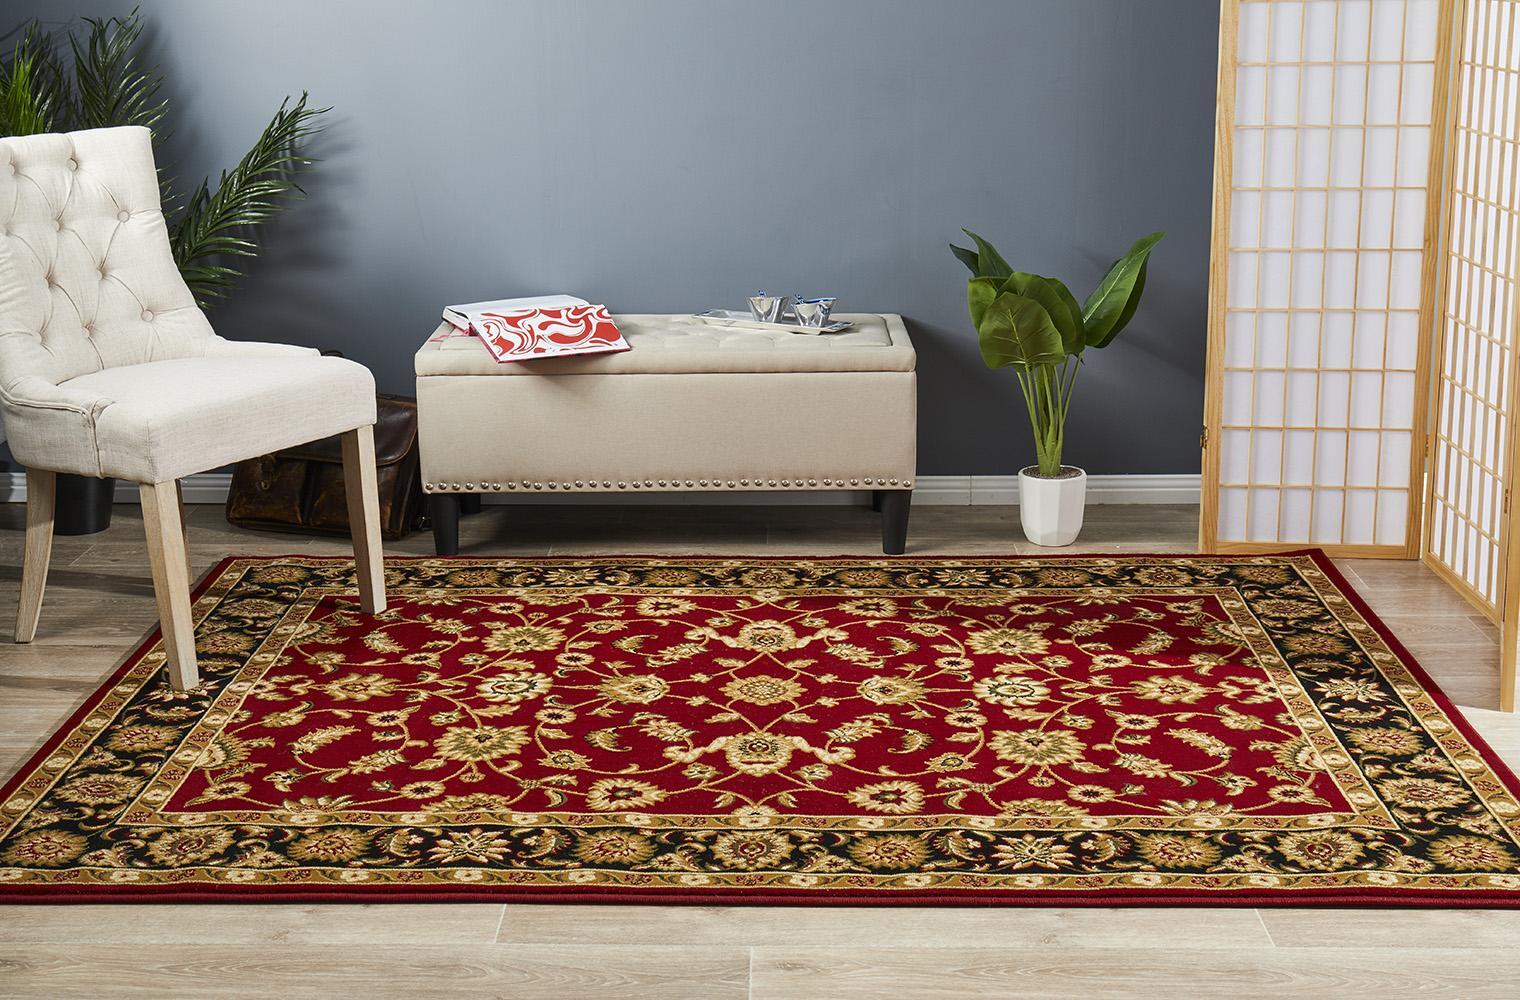 Rug Culture Classic Runner Red with Black Border 400x80cm